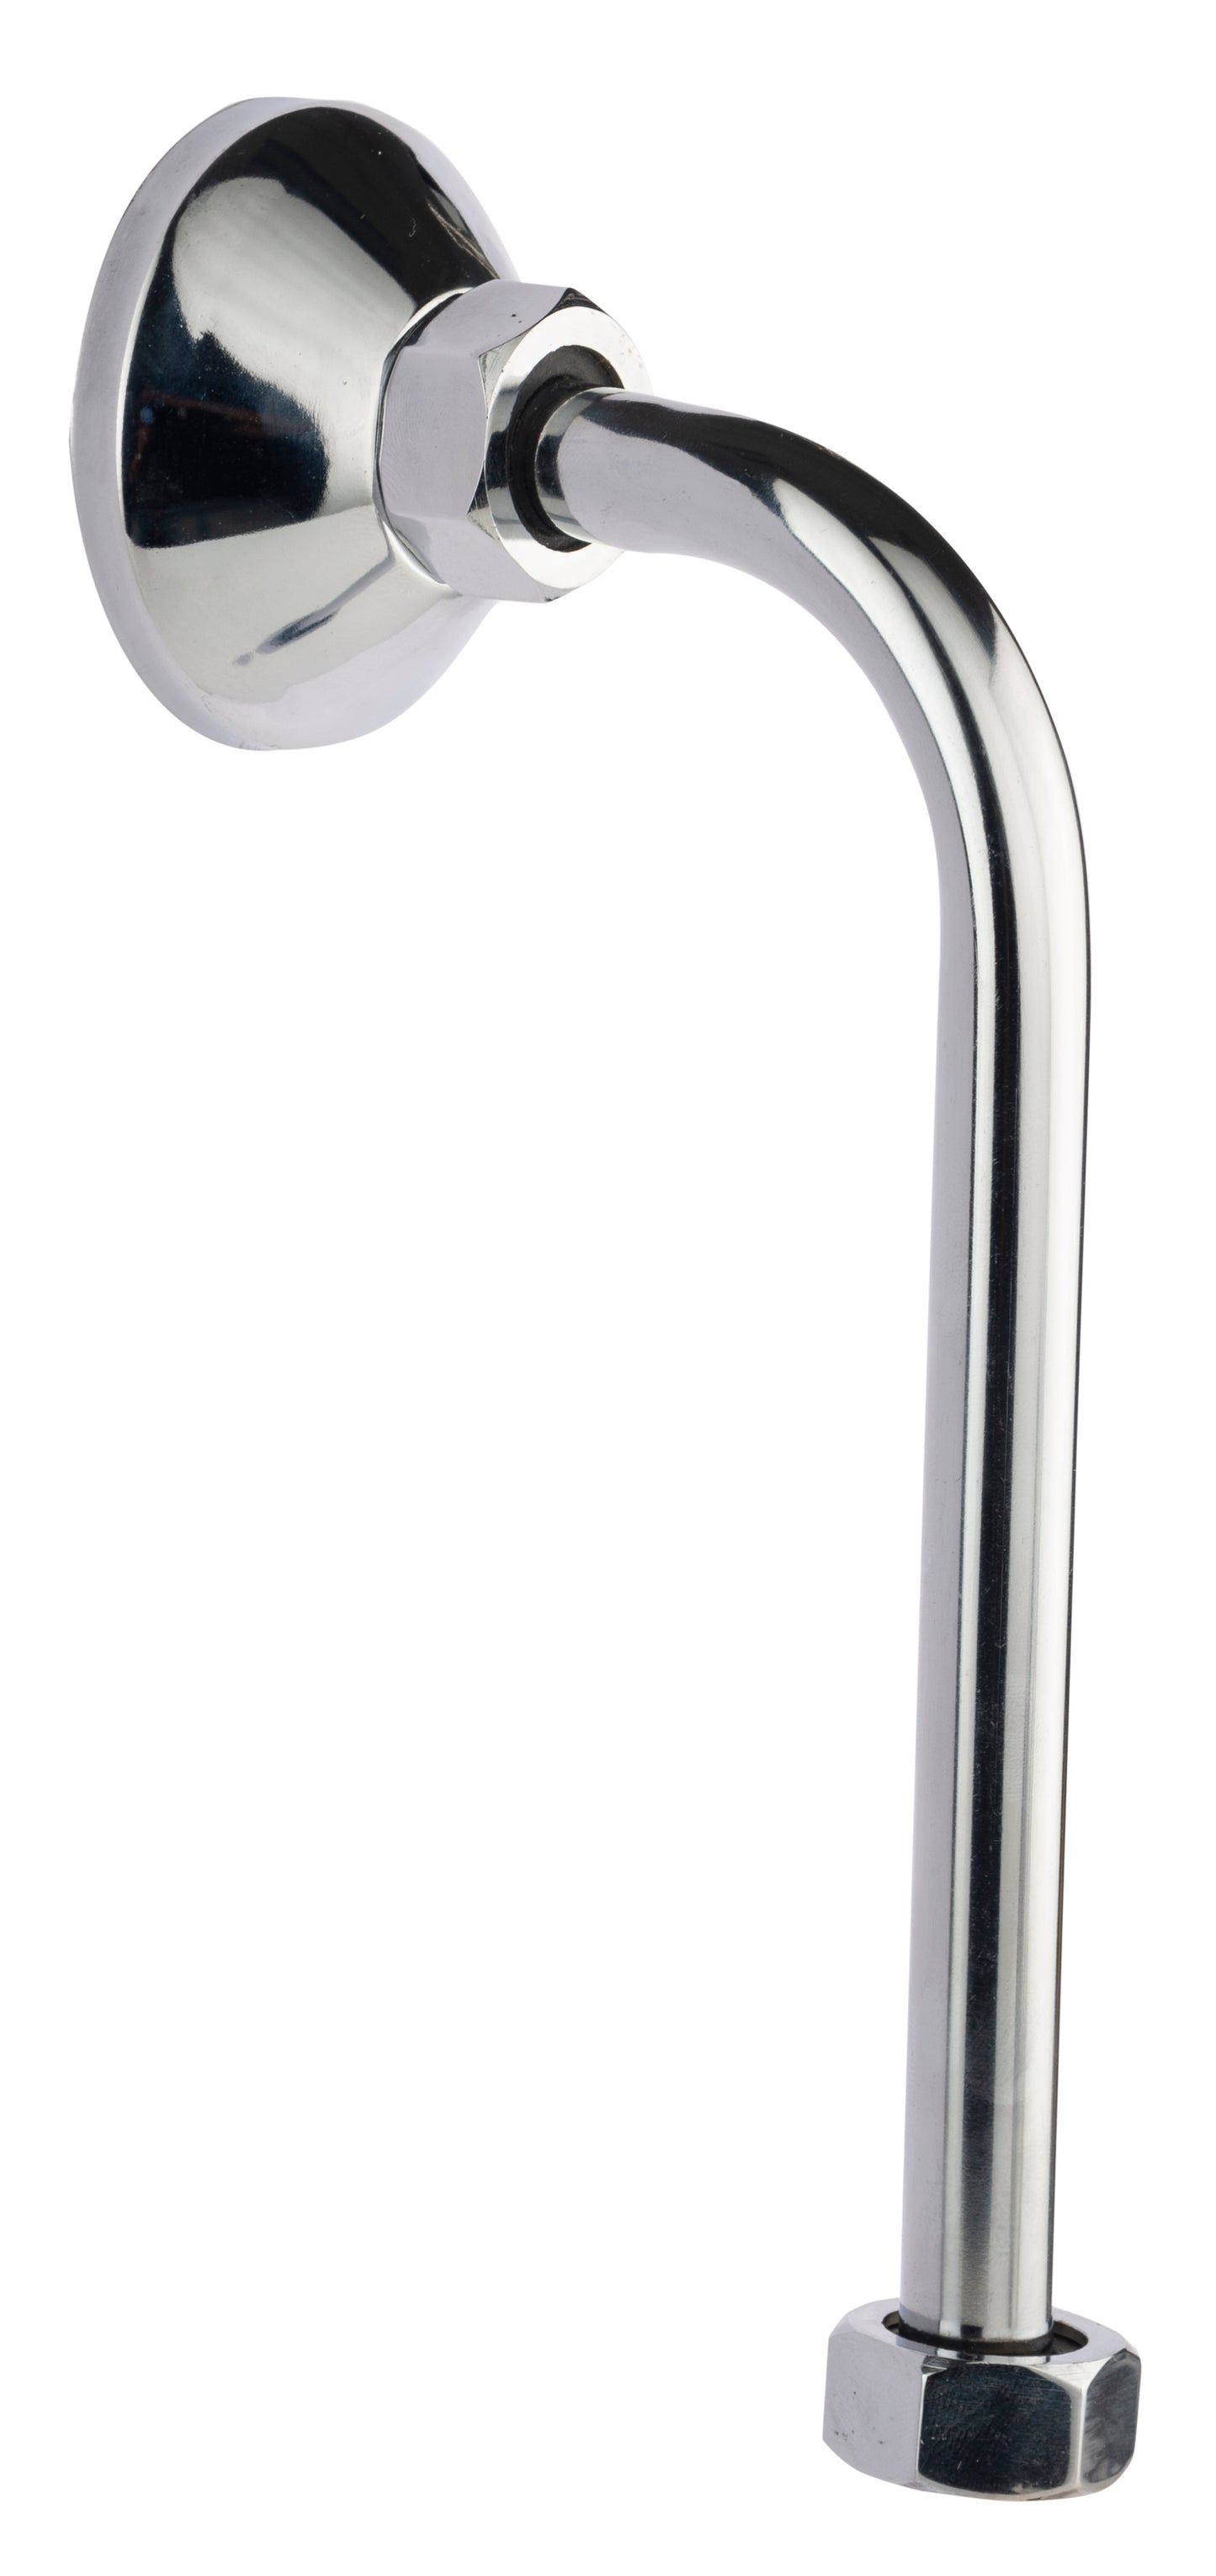 MT Wall Mixer tap with hot and cold taps for bathroom